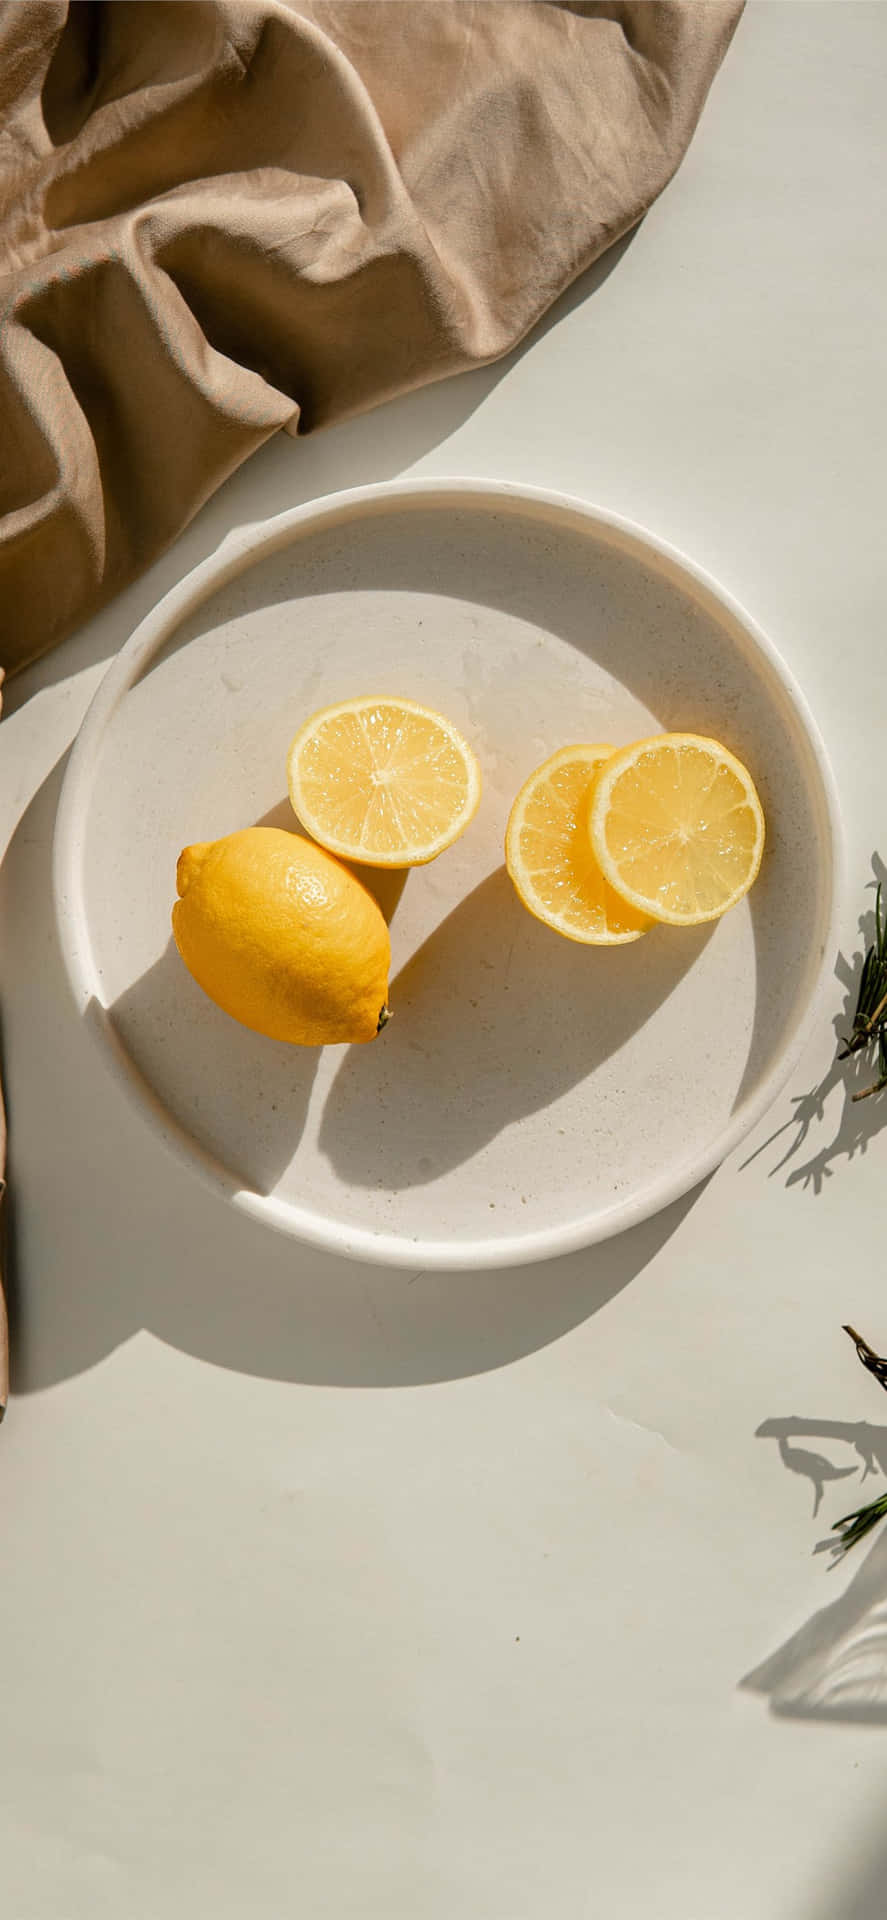 Refresh your work and life balance with a fun Lemon Iphone Wallpaper